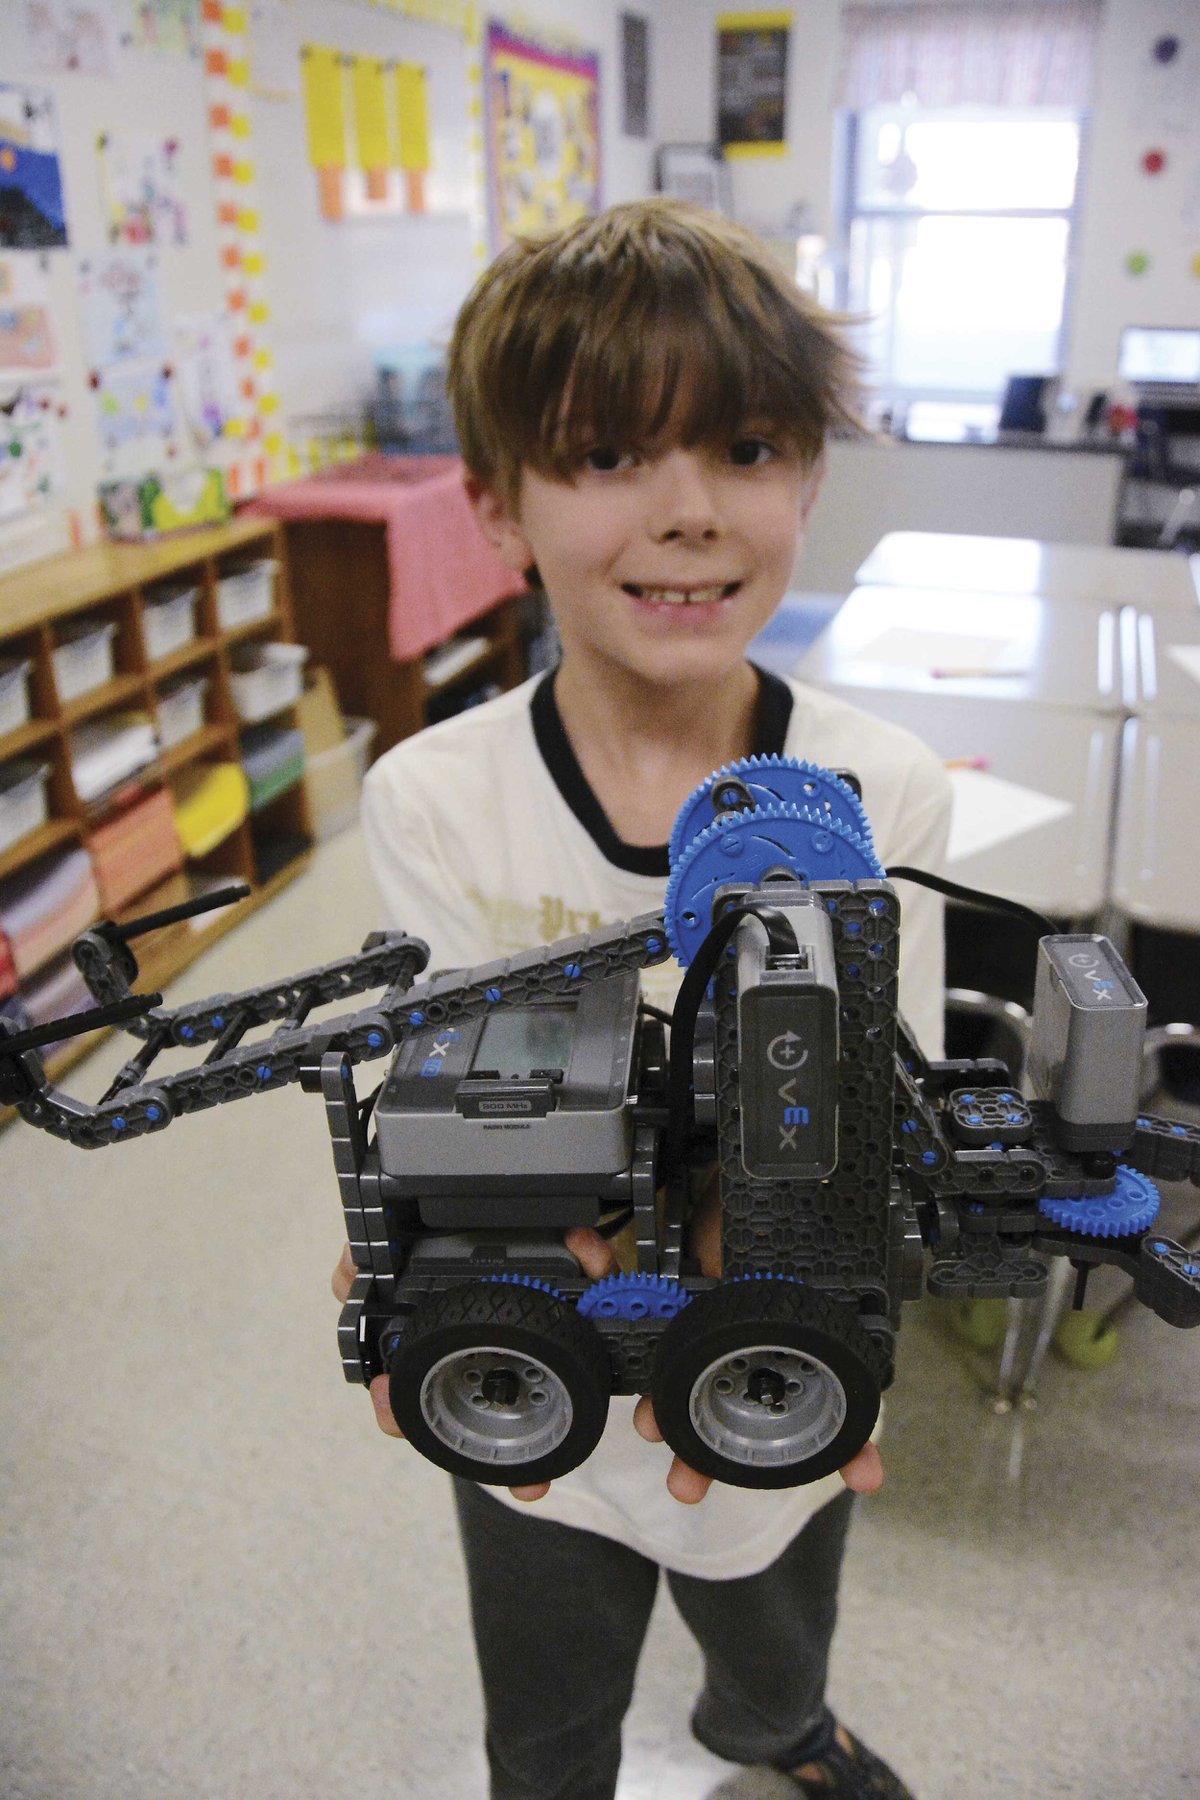 OMES teacher using robots in the classroom - 280Living.com